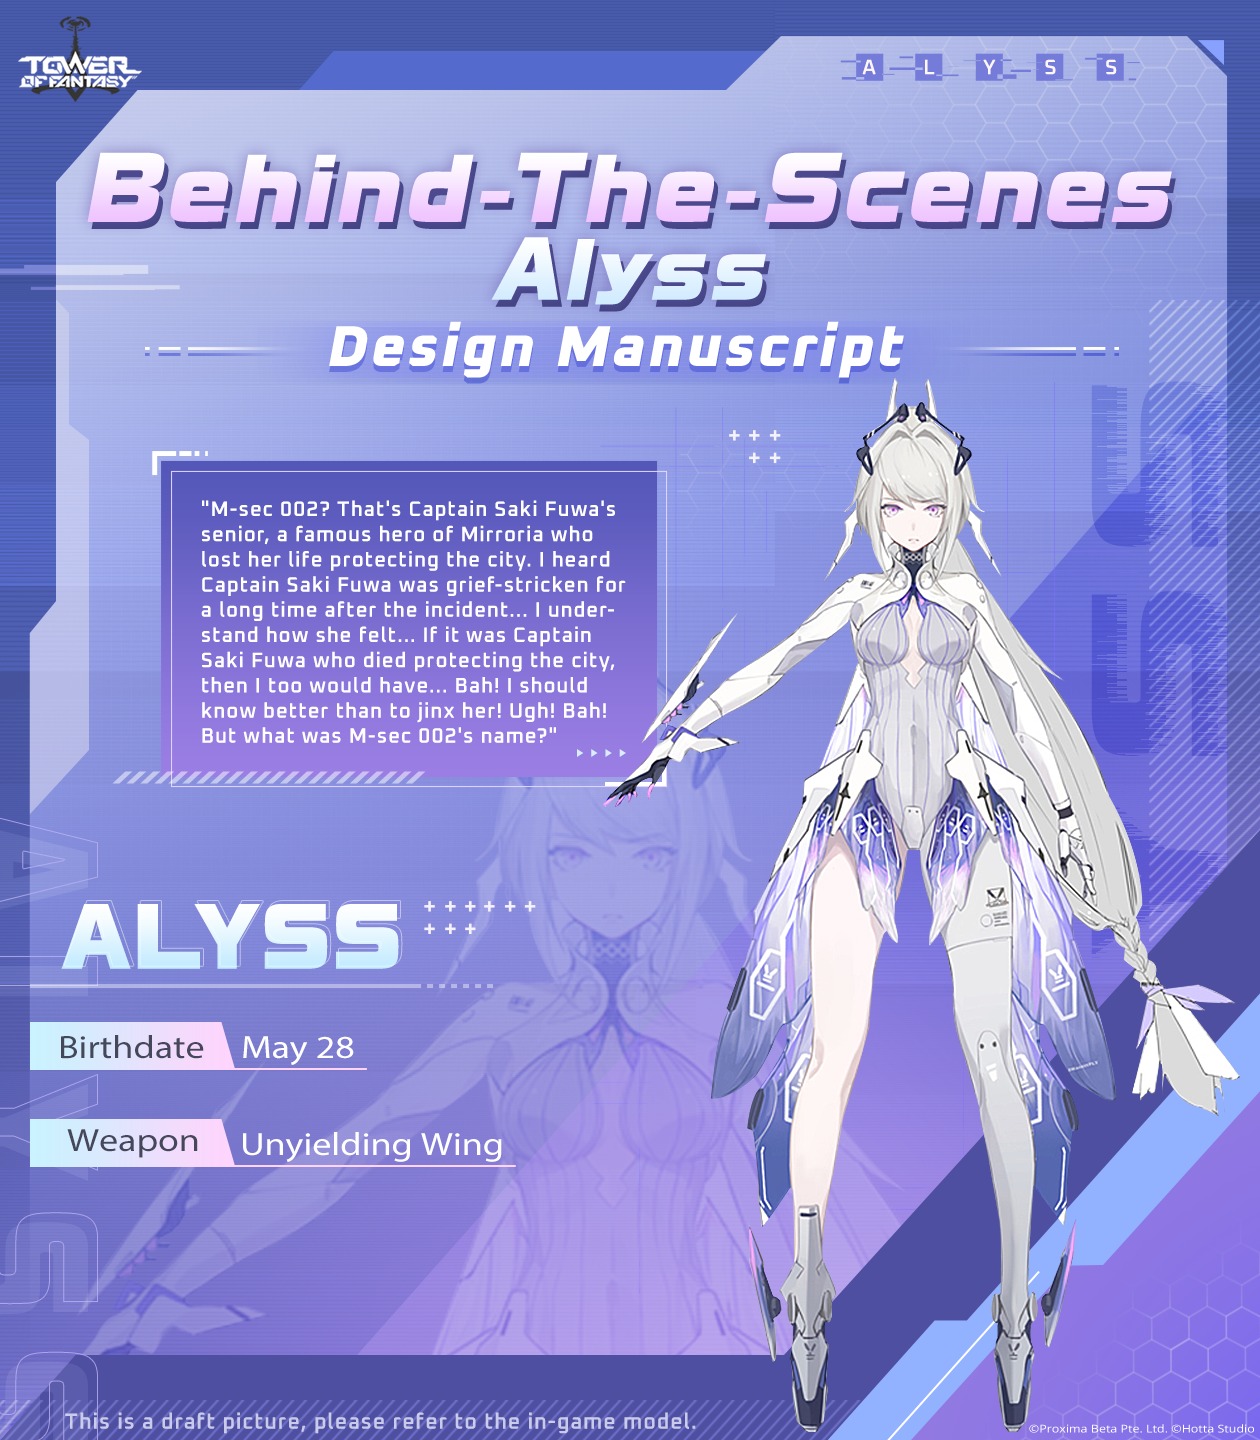 Tower of Fantasy reveals new character Alyss in V3.2 Update 